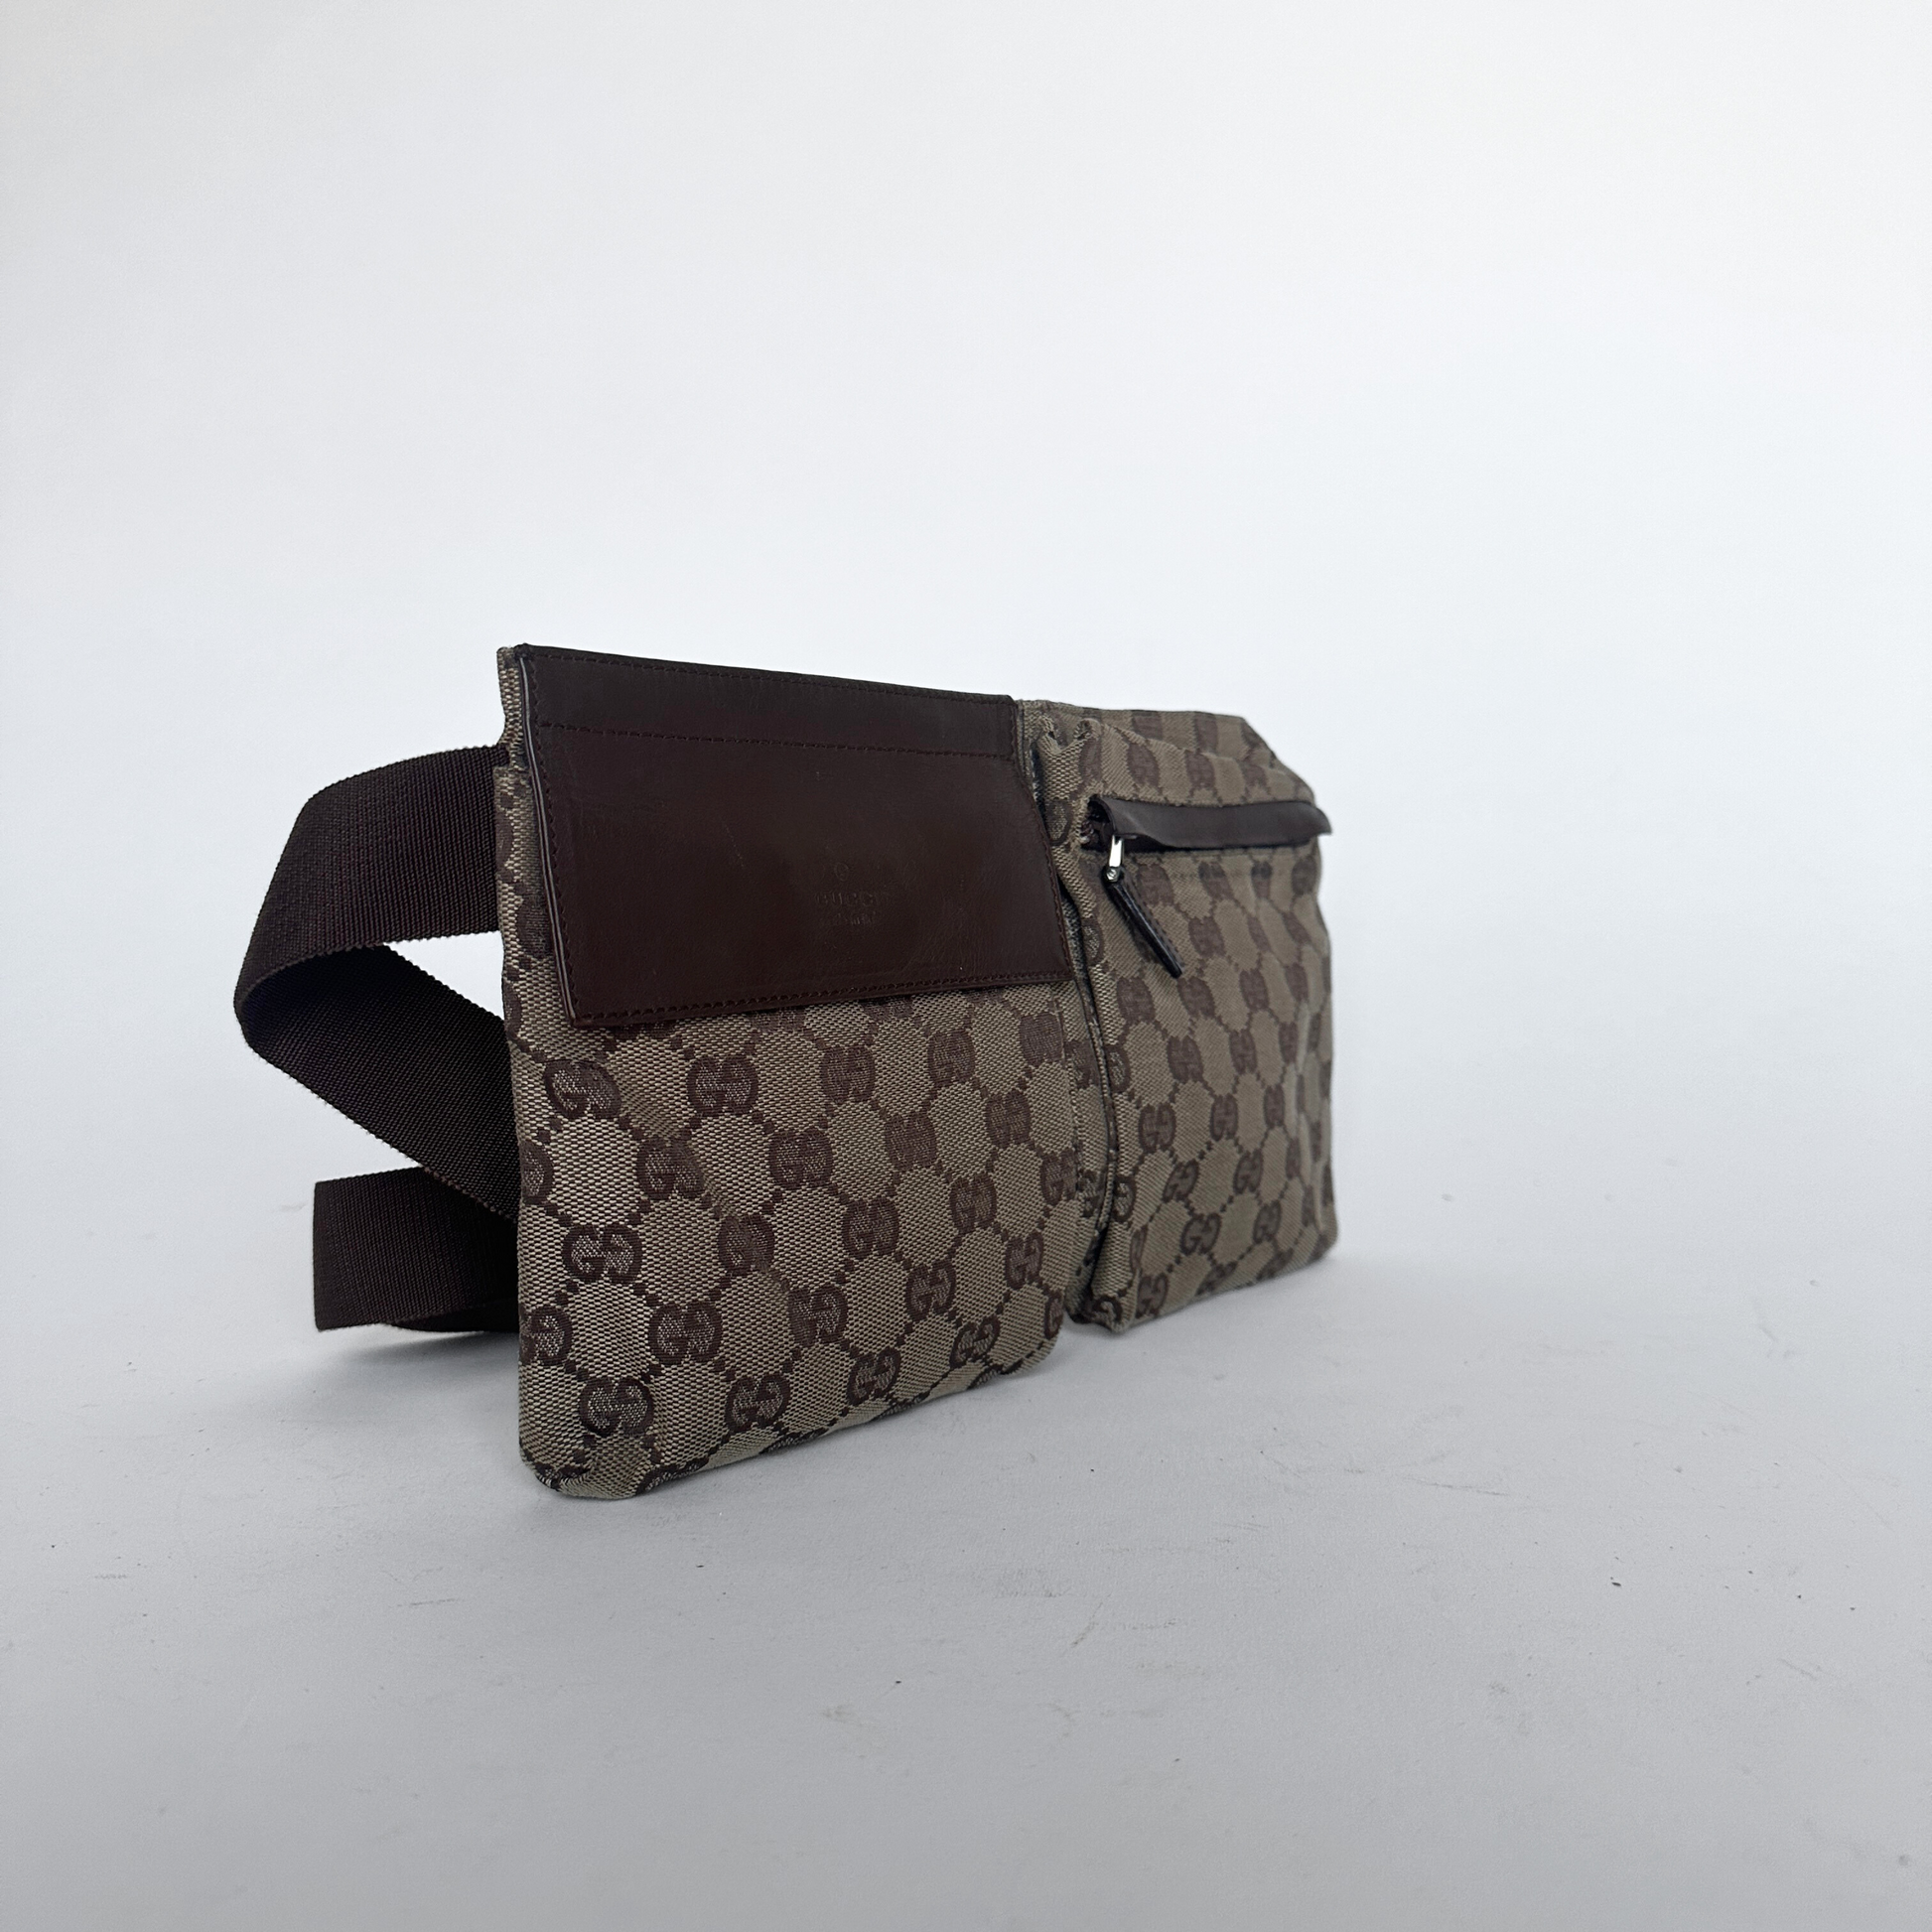 Gucci Gucci Fanny Pack in Monogram Canvas - Crossbody bags - Etoile Luxury Vintage